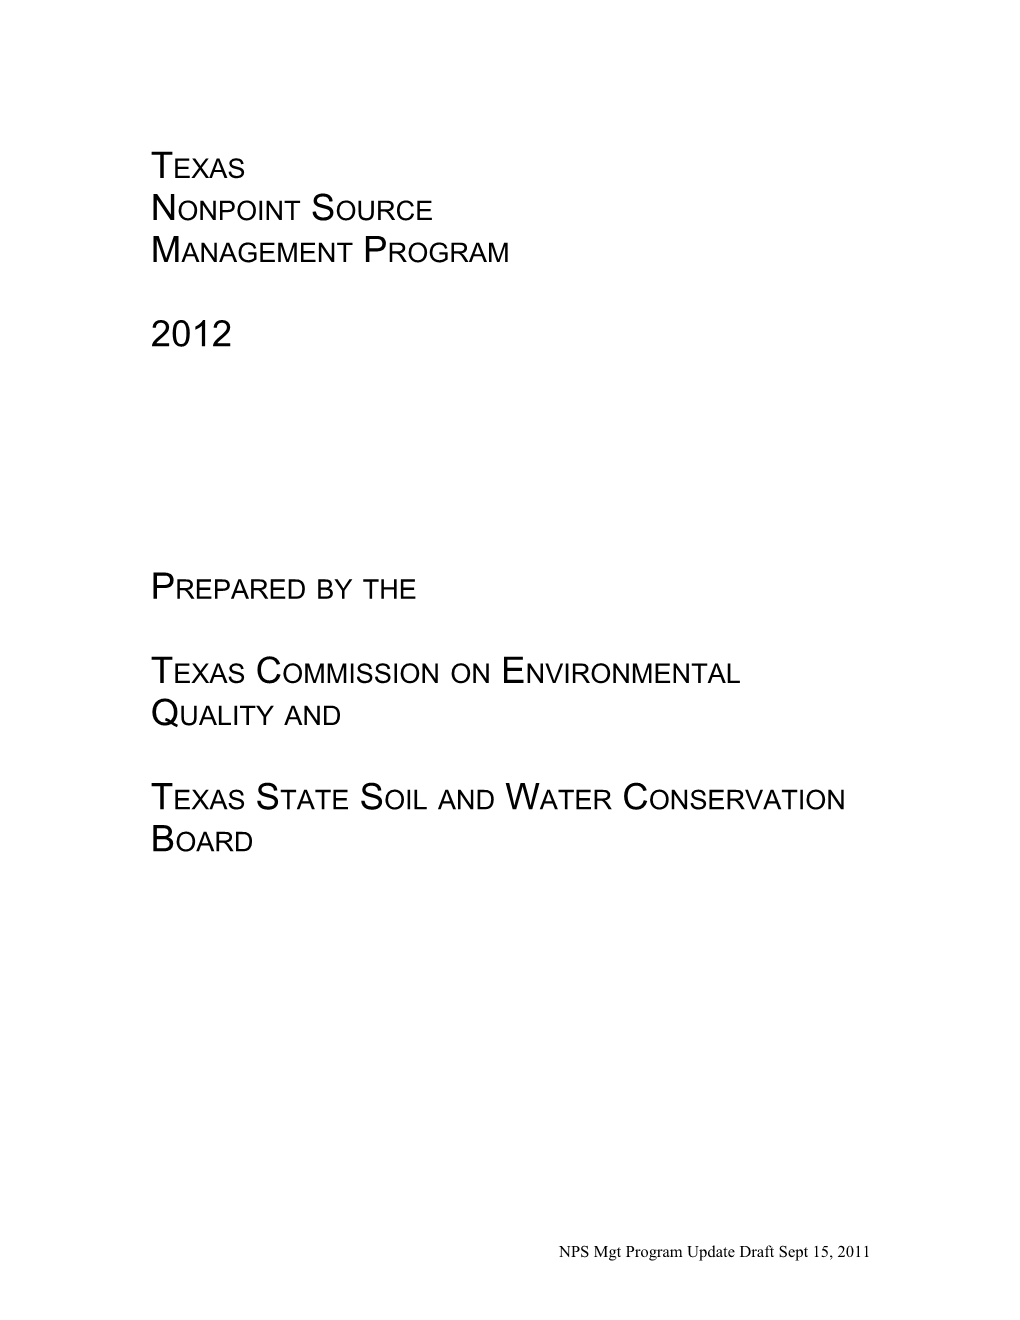 Texas Commission on Environmental Quality And